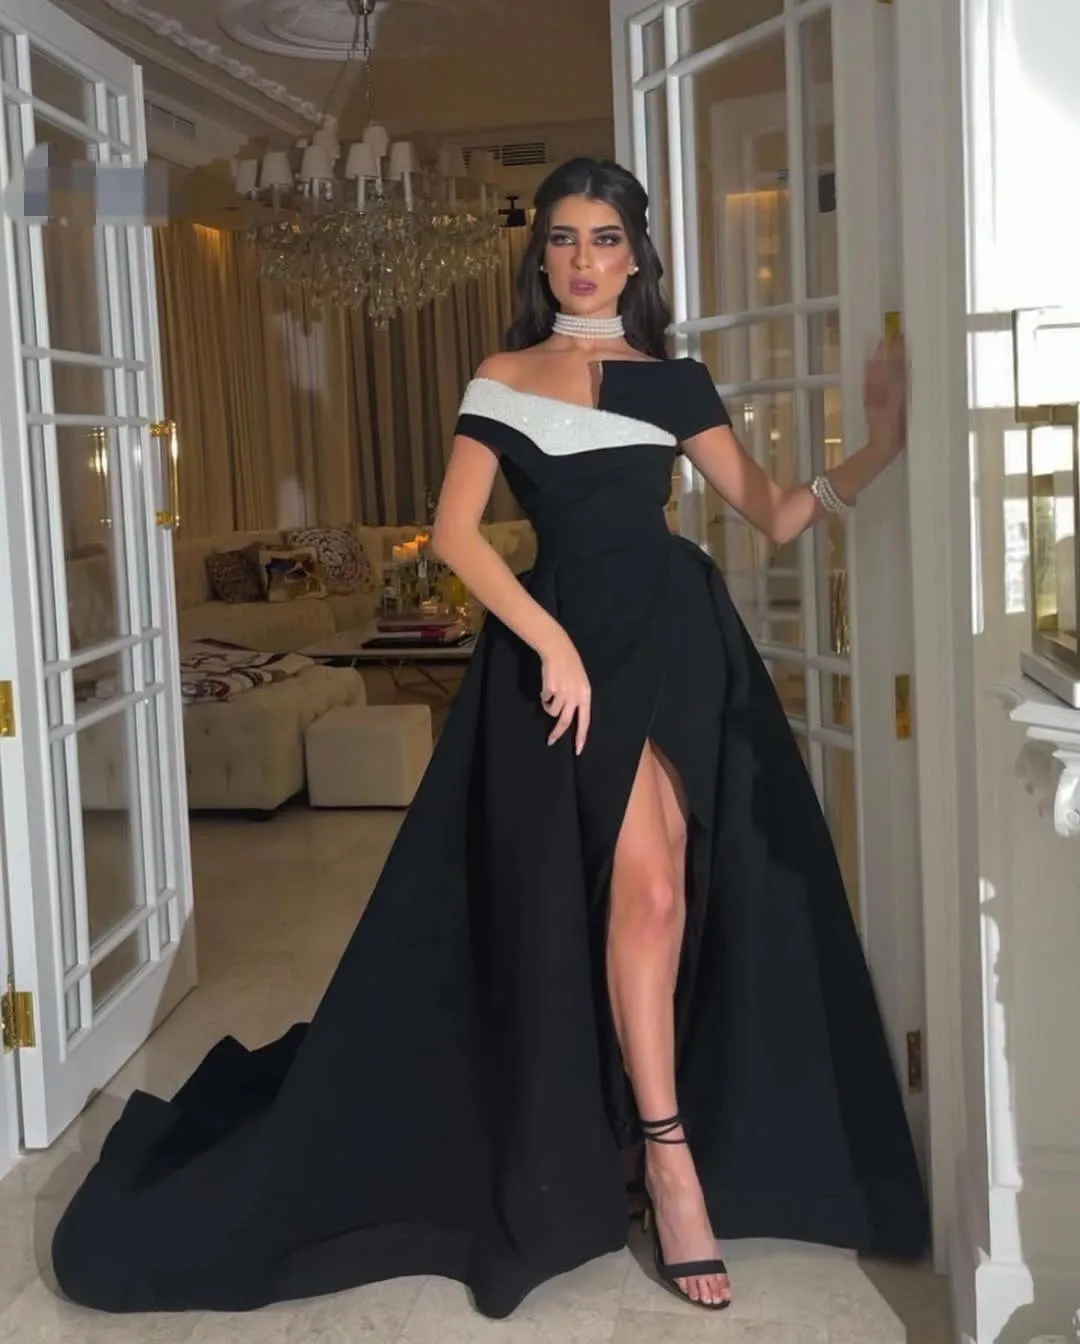 Elegant Evening Dresses Saudi Arabia strapless short sleeves beasded Long Train Black and White for Party Prom Gowns with High Split